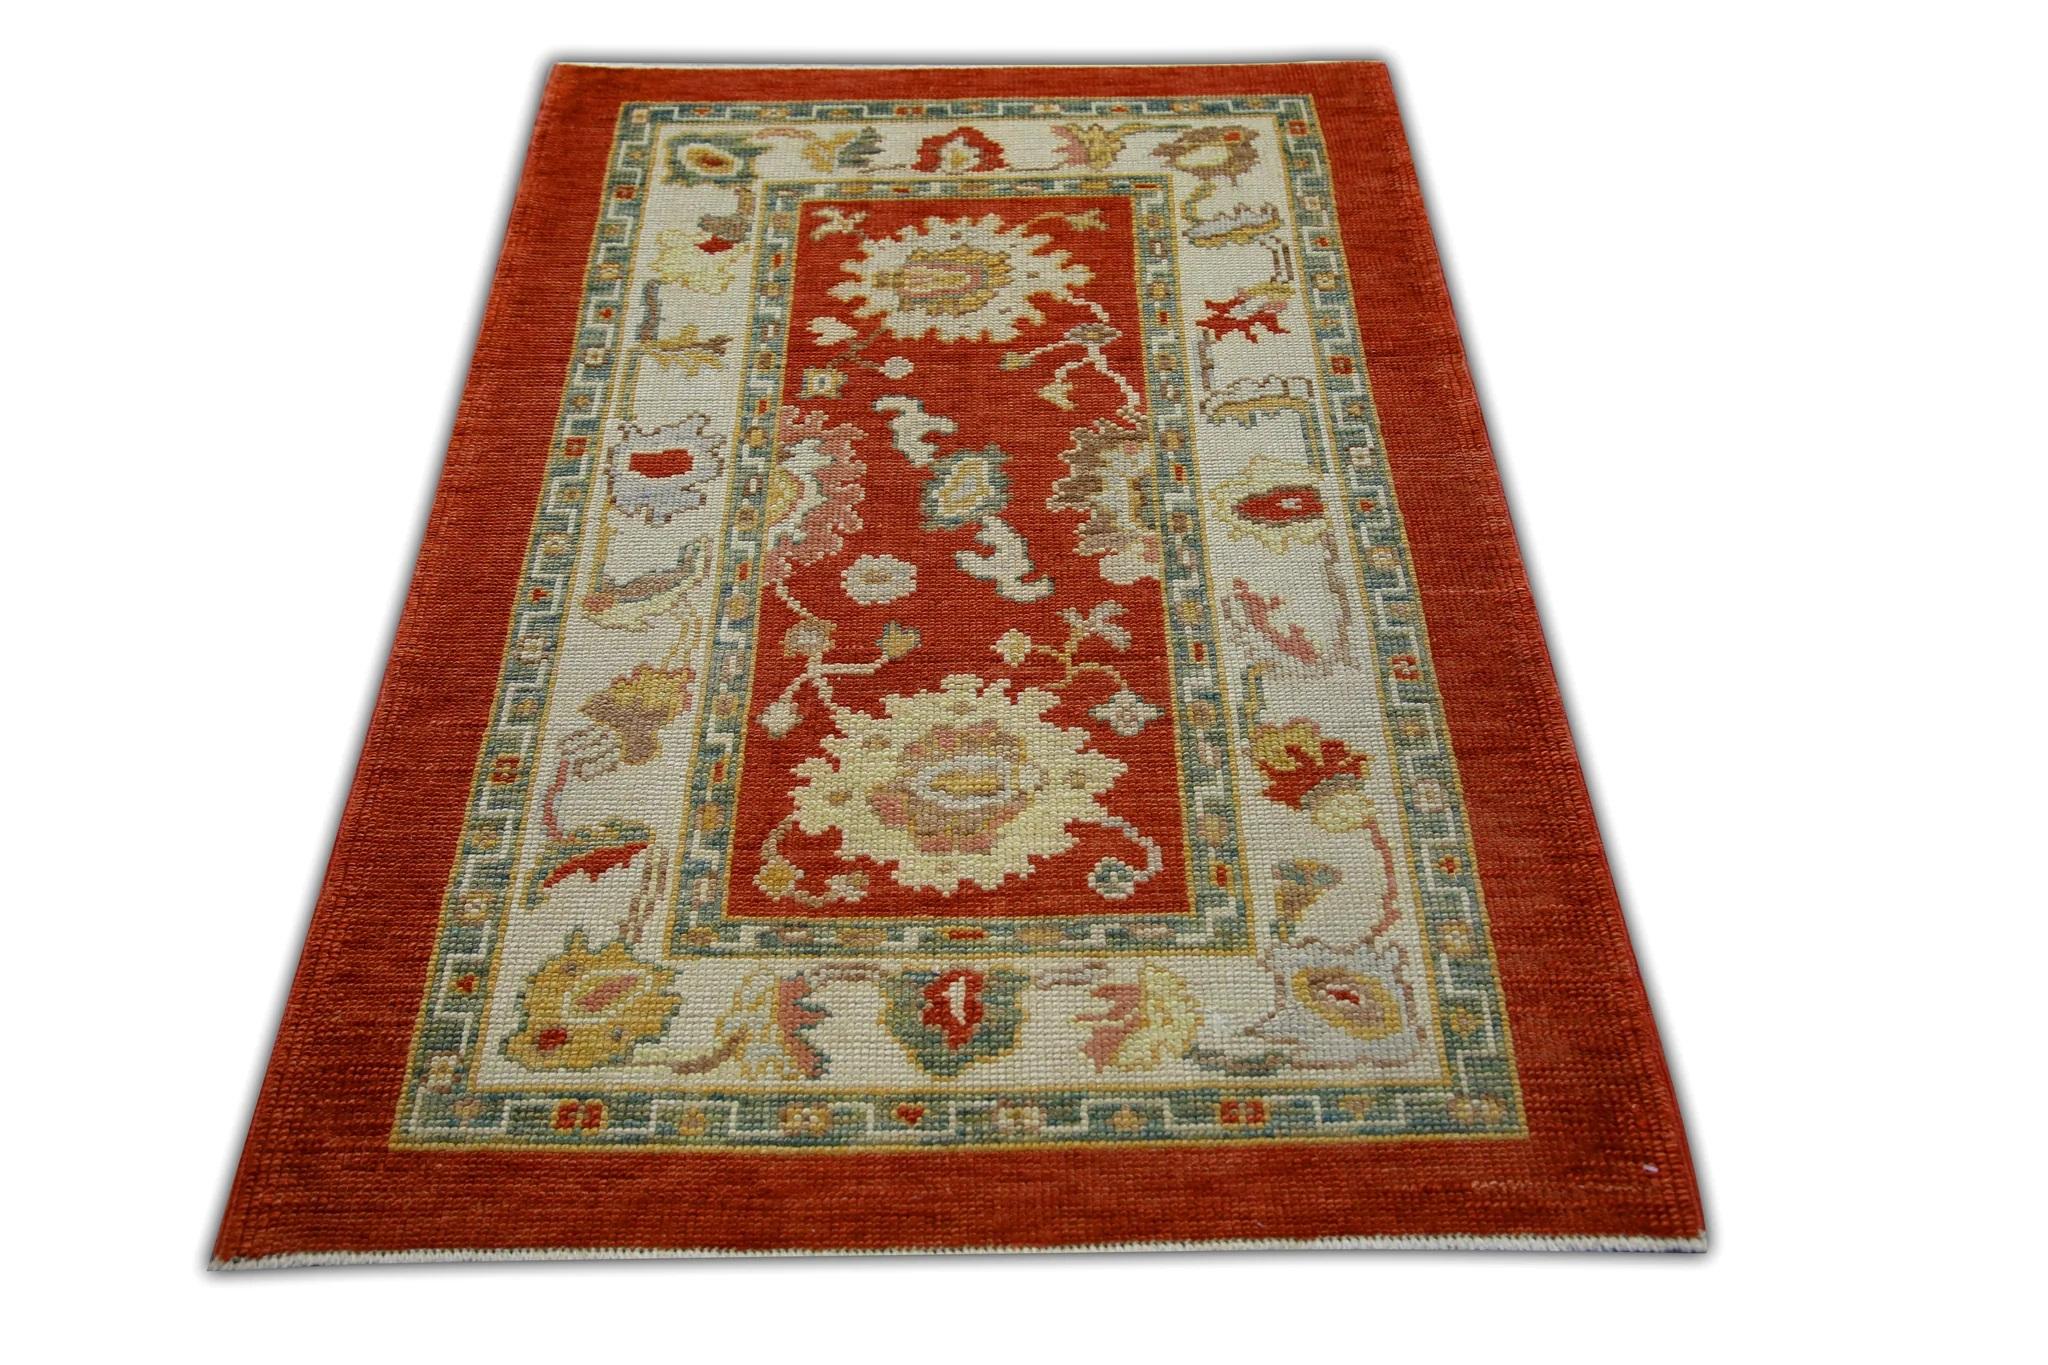 Contemporary Floral Handwoven Wool Turkish Oushak Rug in Deep Red, Cream, and Green 3'1x4'10 For Sale